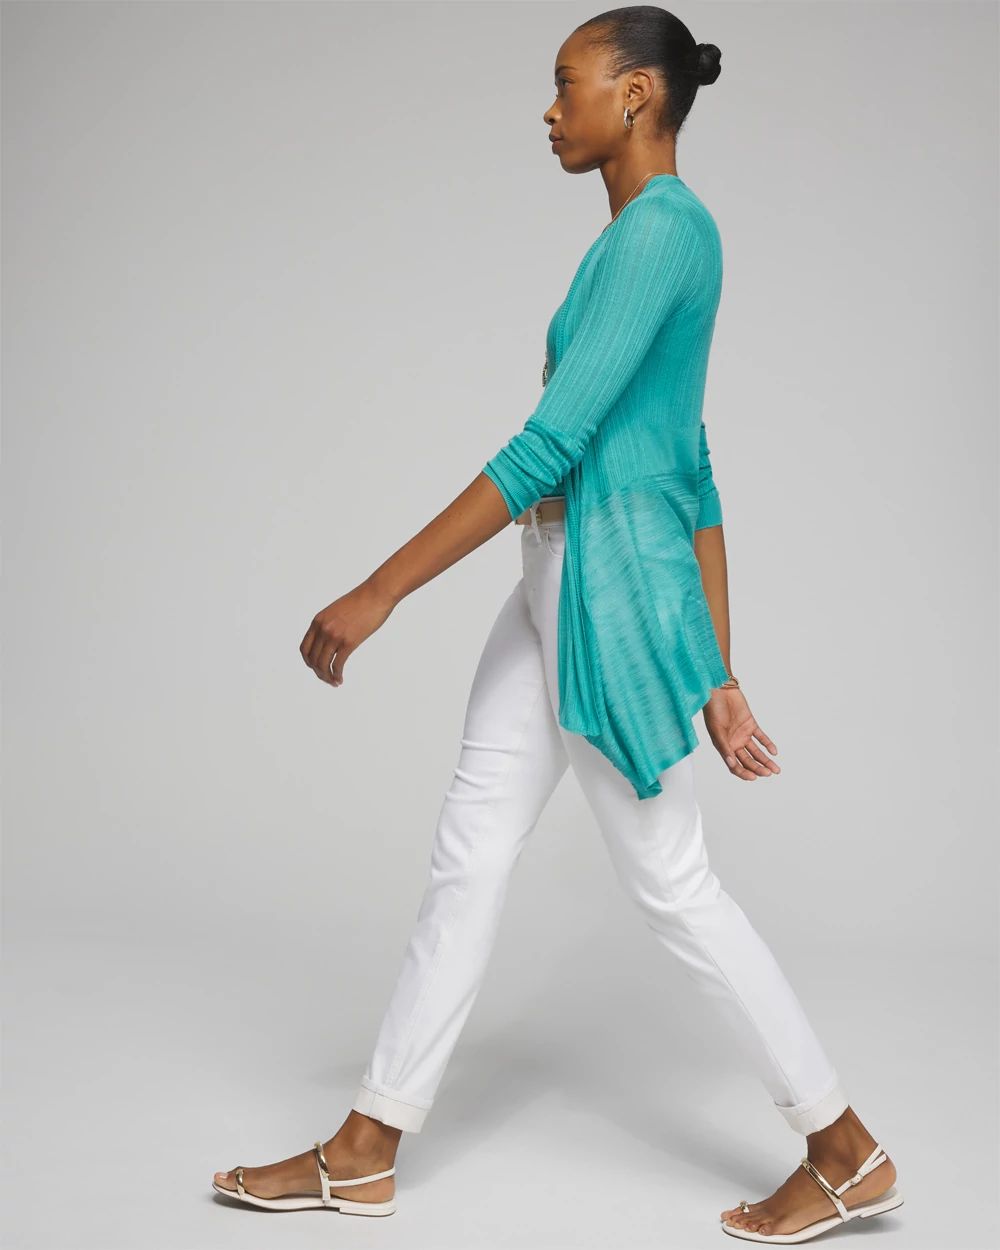 Outlet WHBM Stitch Flyaway Coverup click to view larger image.